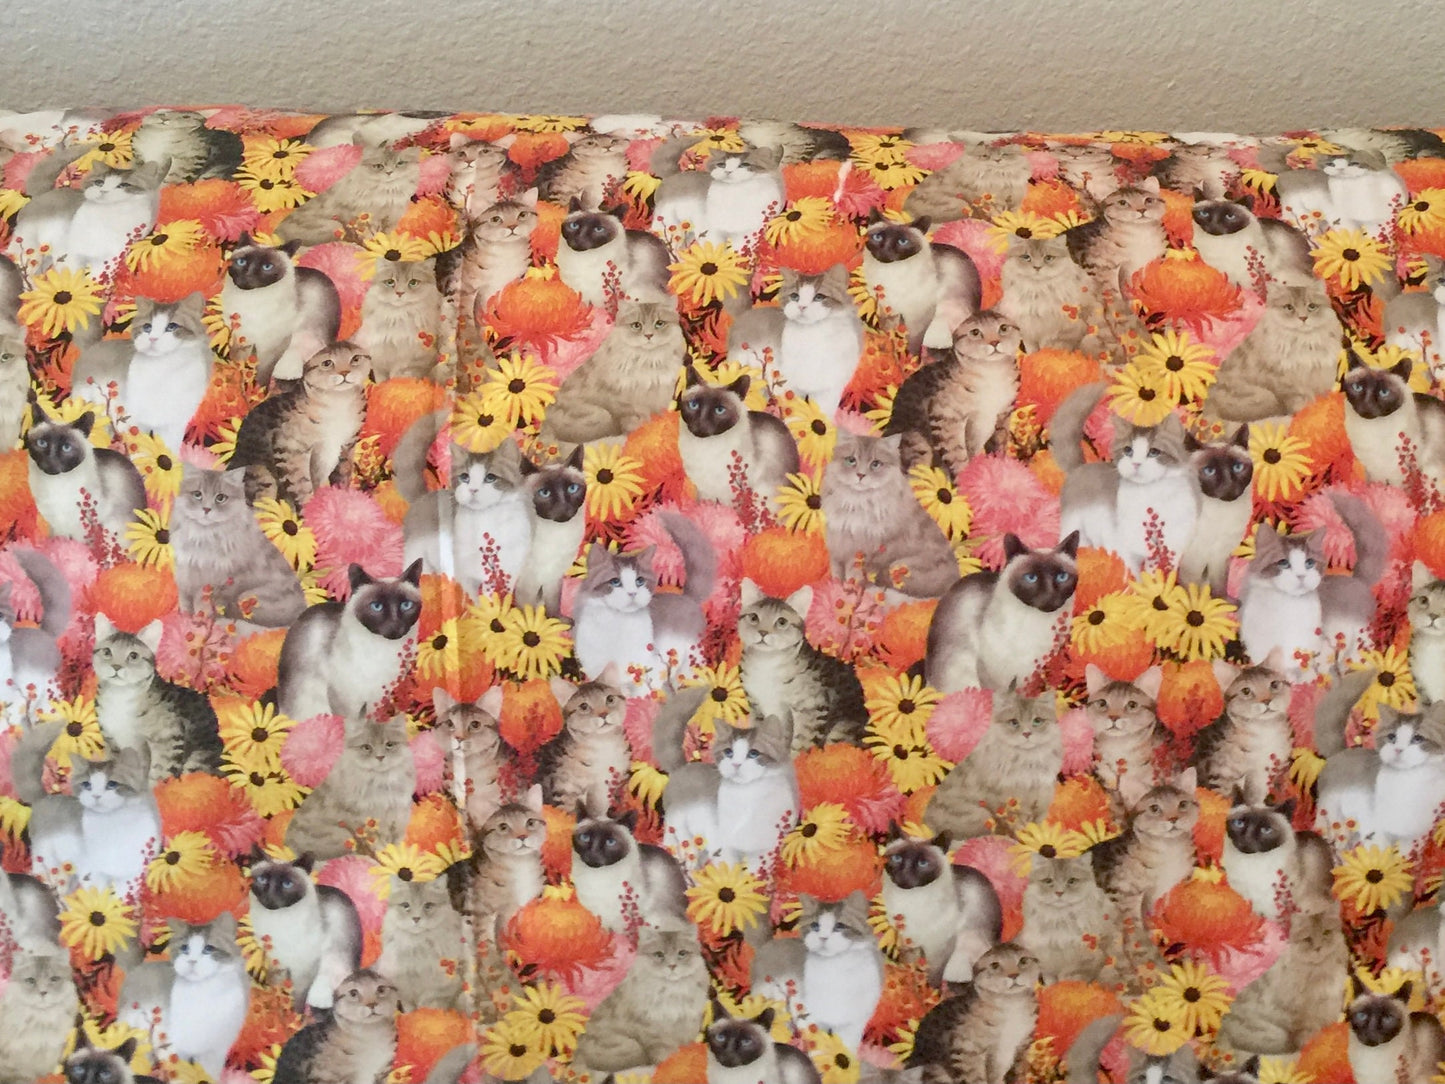 Beautiful cat, kitten and flowers and “meow” reversible blanket